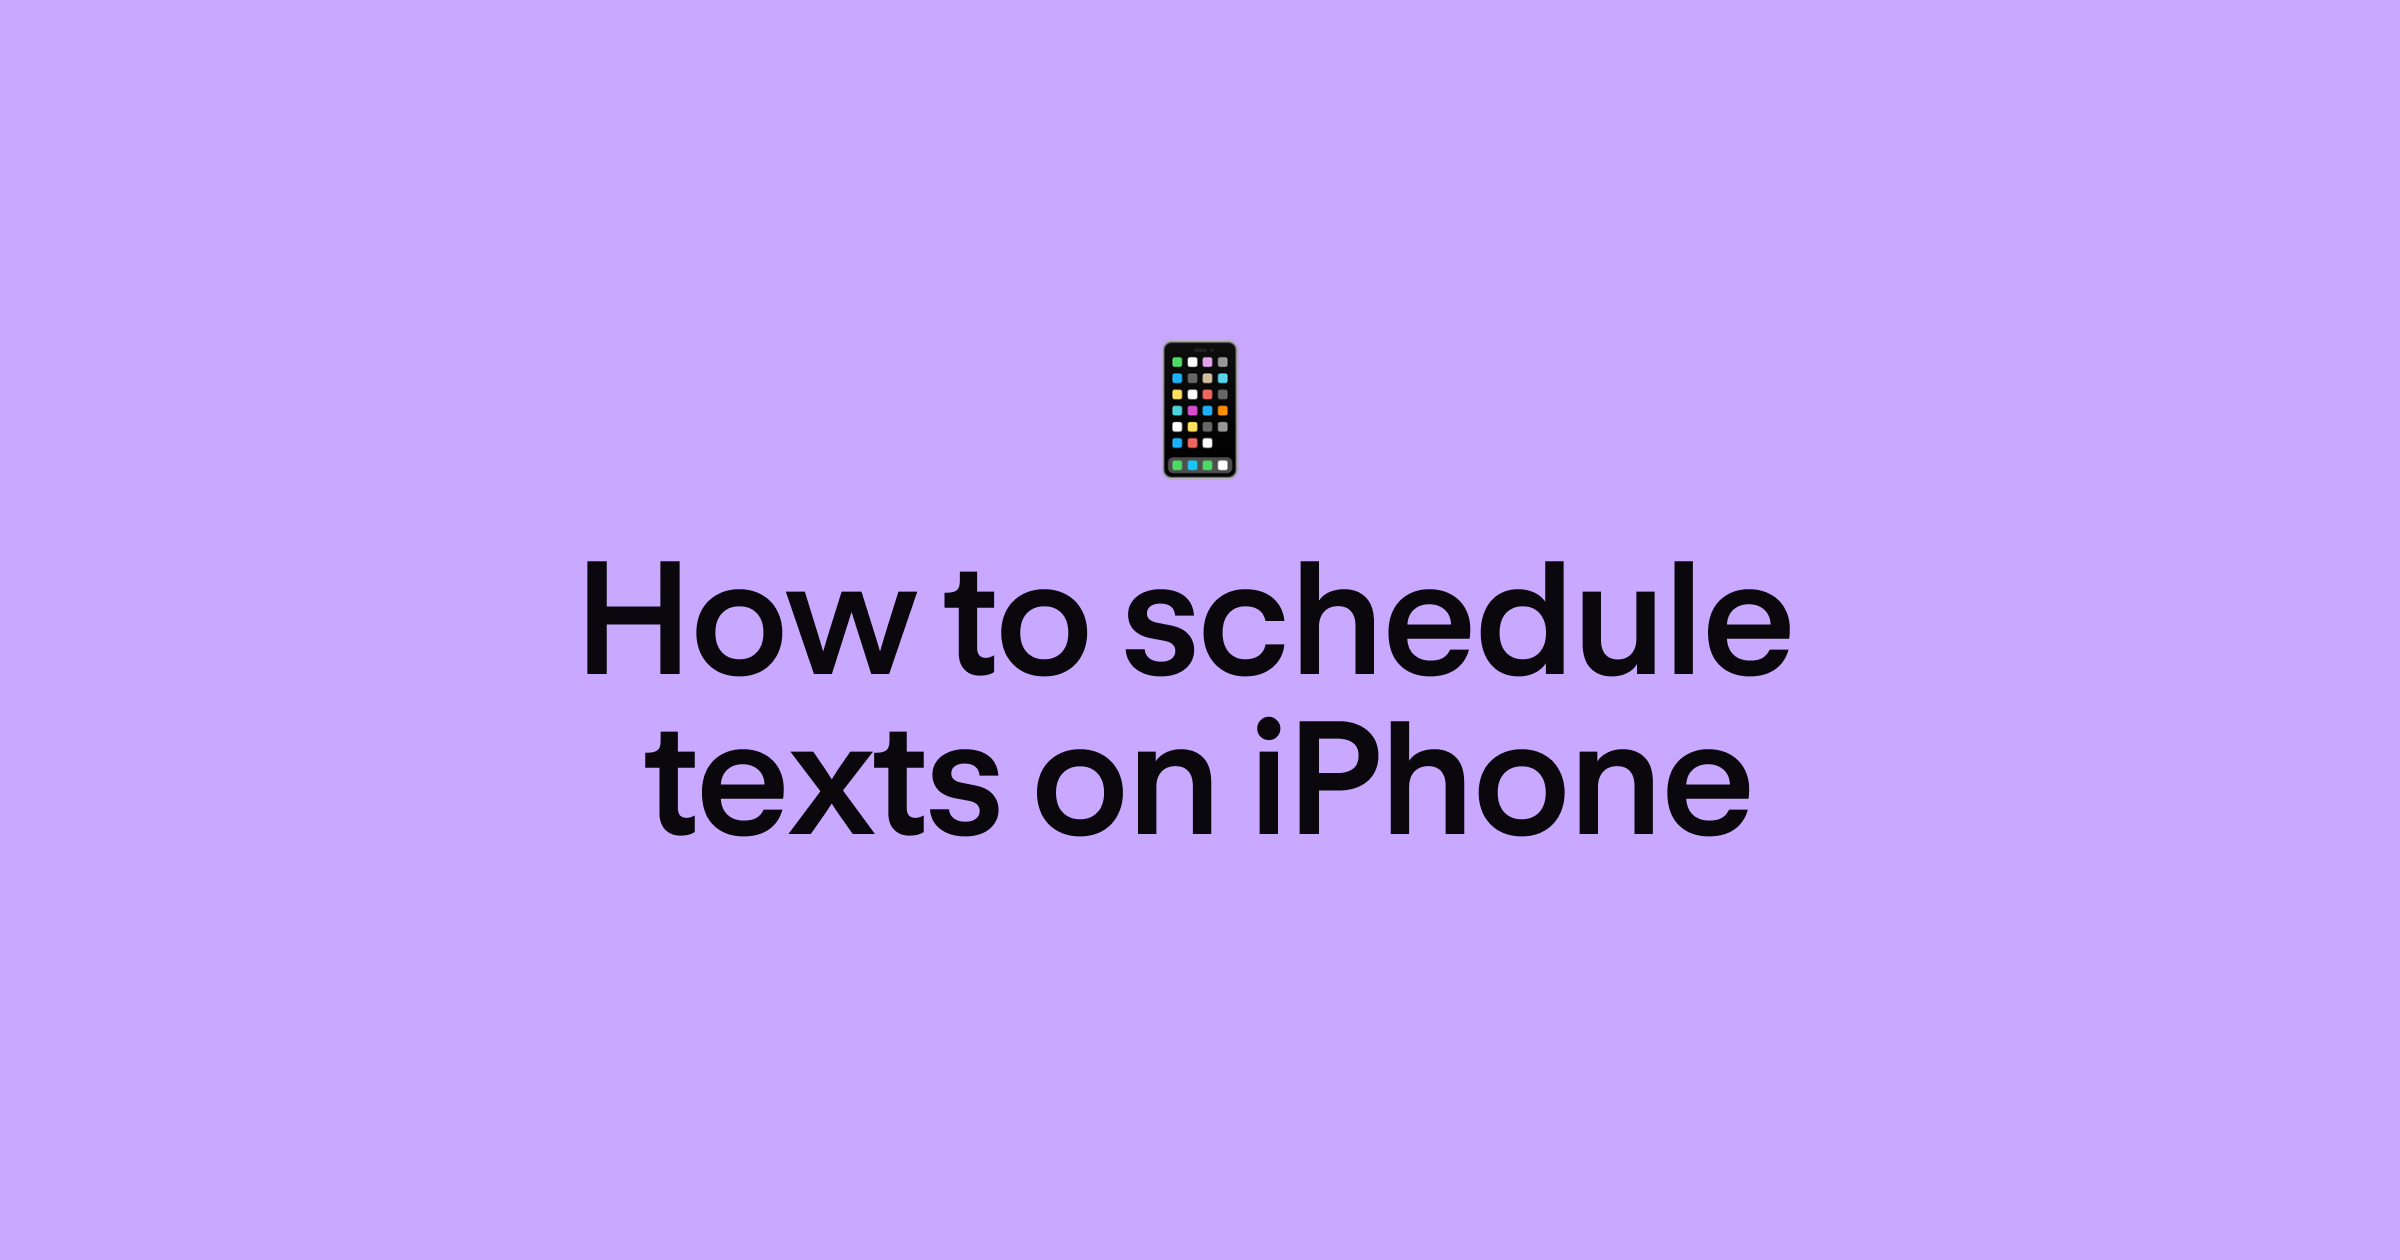 Schedule texts on iPhone